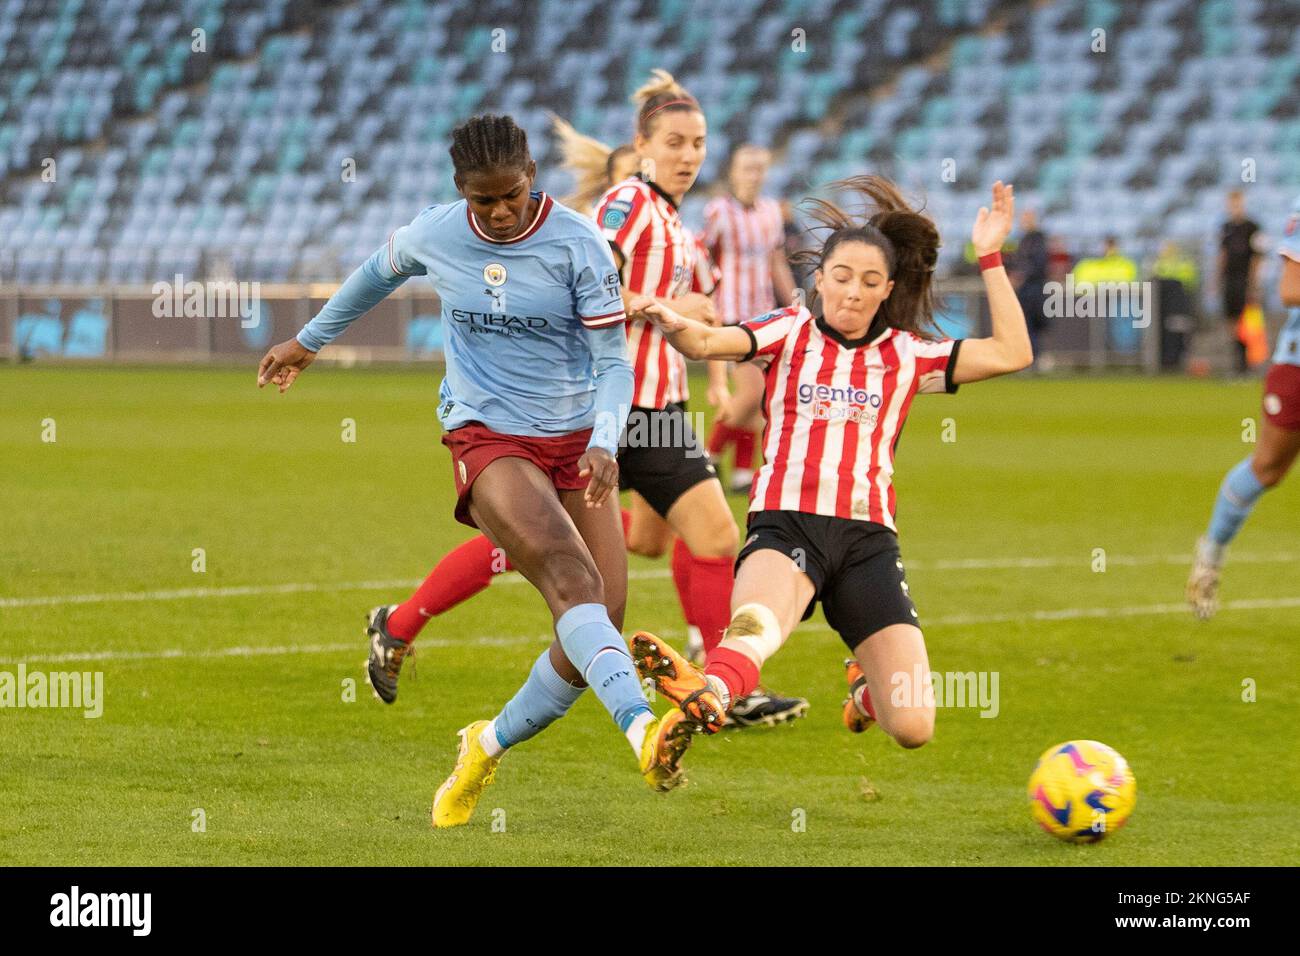 Manchester, UK. Sunday 27th November 2022. Khadija Shaw #21 of Manchester City goes for goal during the Continental Cup match between Manchester City and Sunderland at the Academy Stadium, Manchester on Sunday 27th November 2022. (Credit: Mike Morese | MI News) Credit: MI News & Sport /Alamy Live News Stock Photo